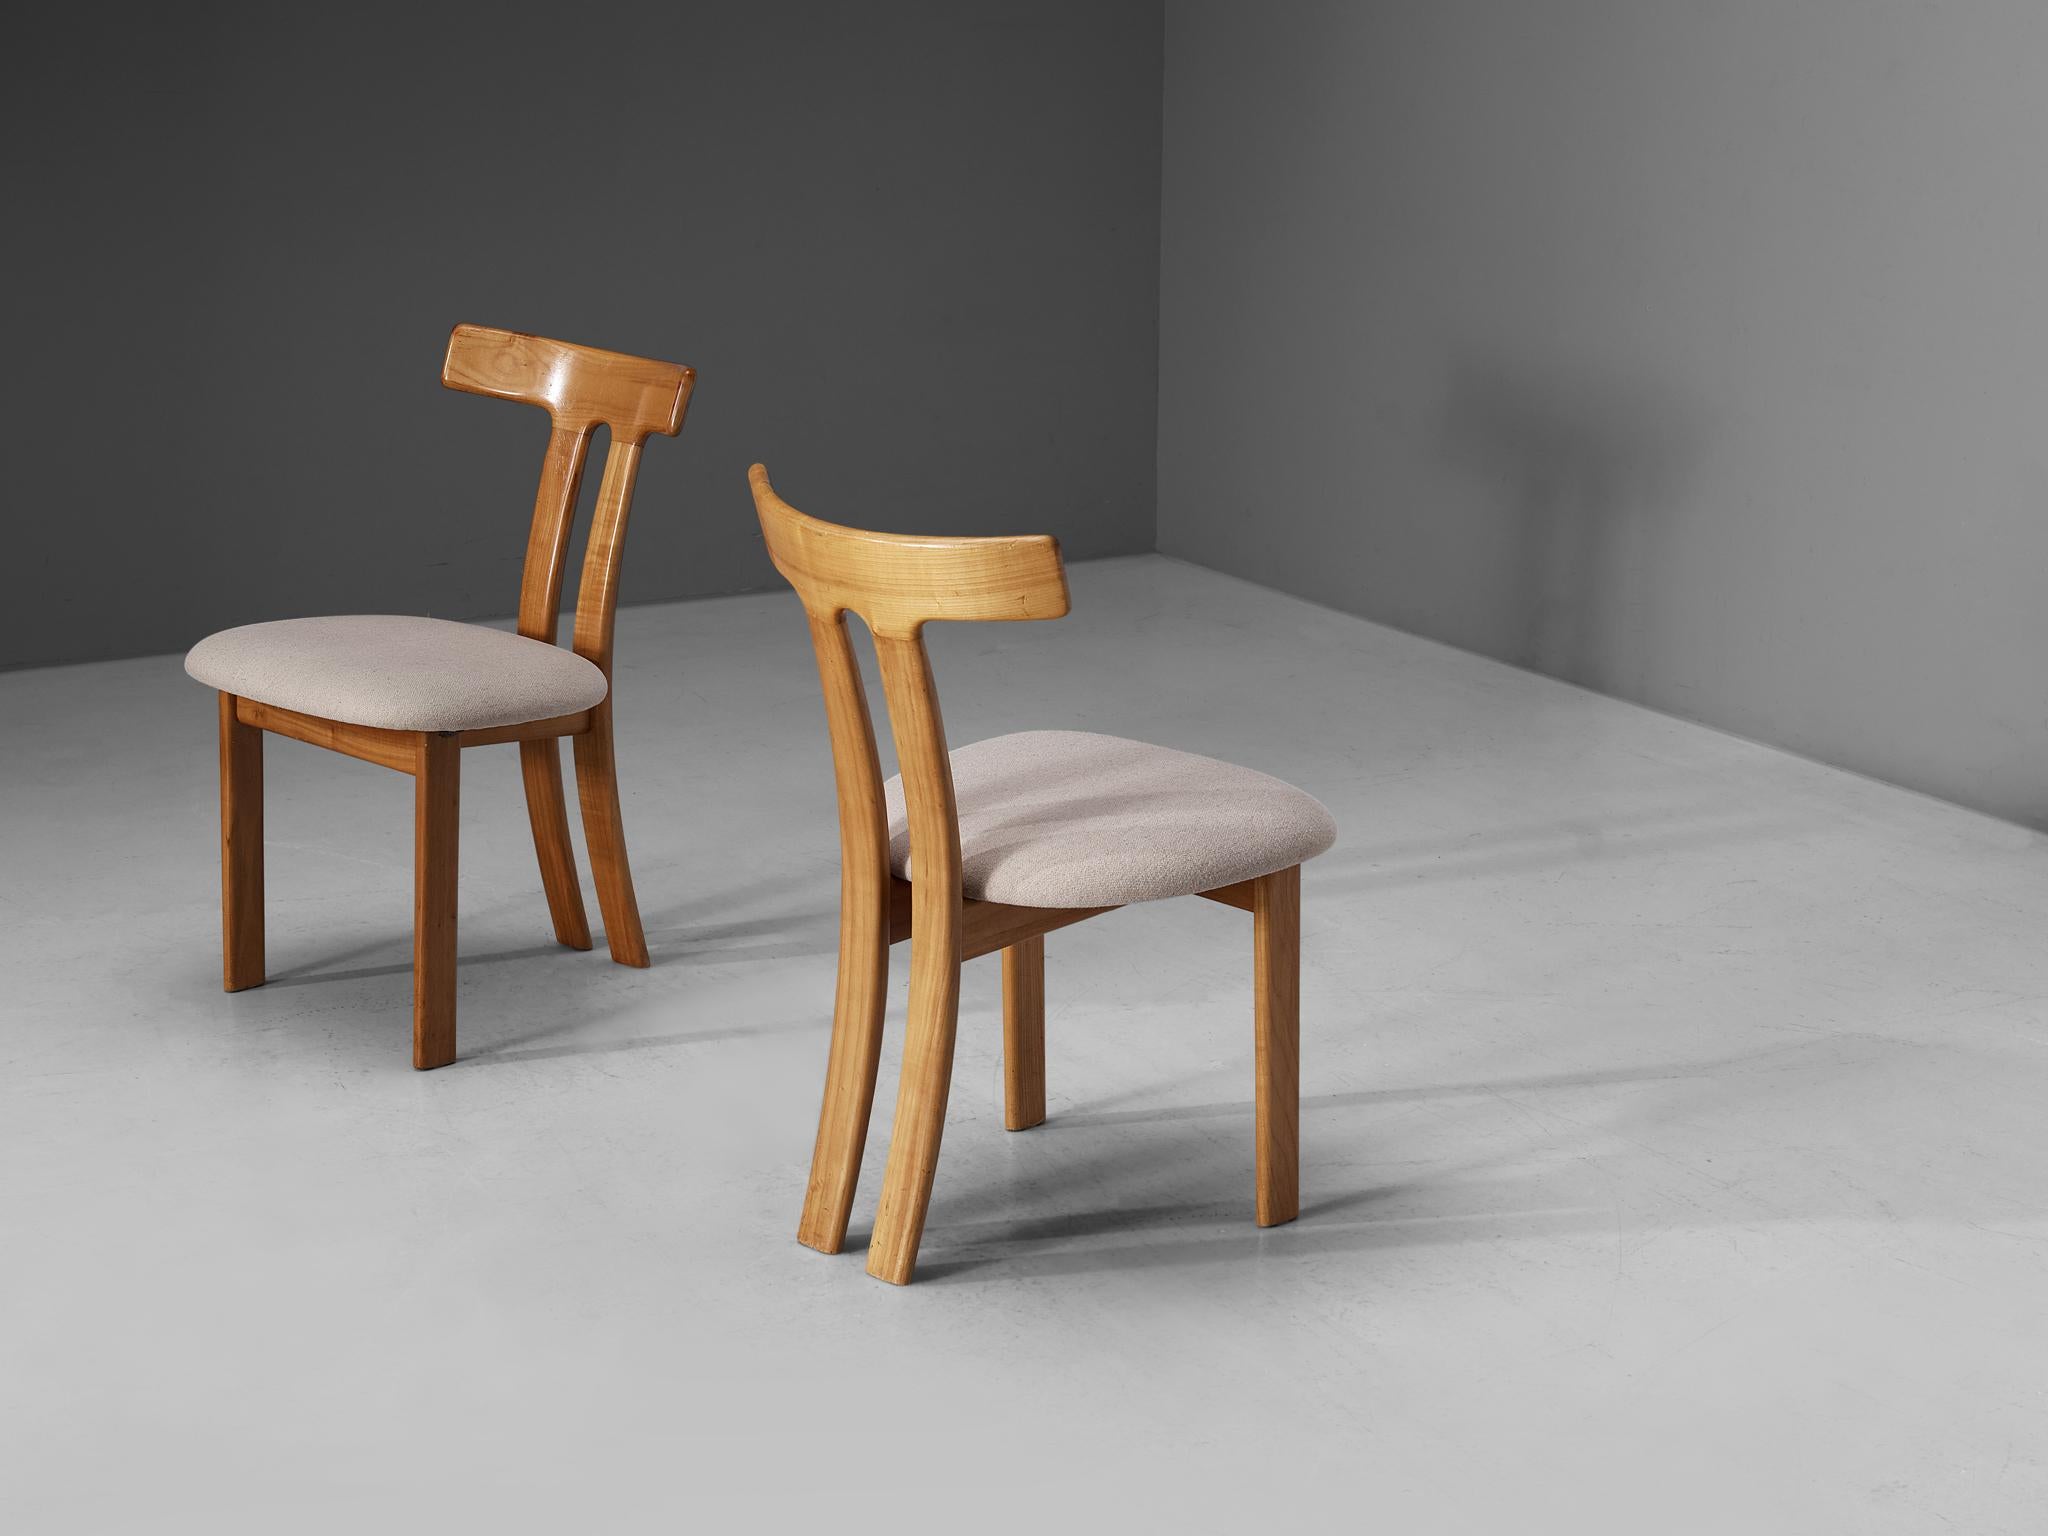 Pair of dining chairs, maple, fabric, France, 1960s. 

These dining chairs have a strong resemblance to Carl Hansen's t-chair and the dining chairs by Sapporo for Mobil Girgi, yet this design is different in its details. Strong vertical and